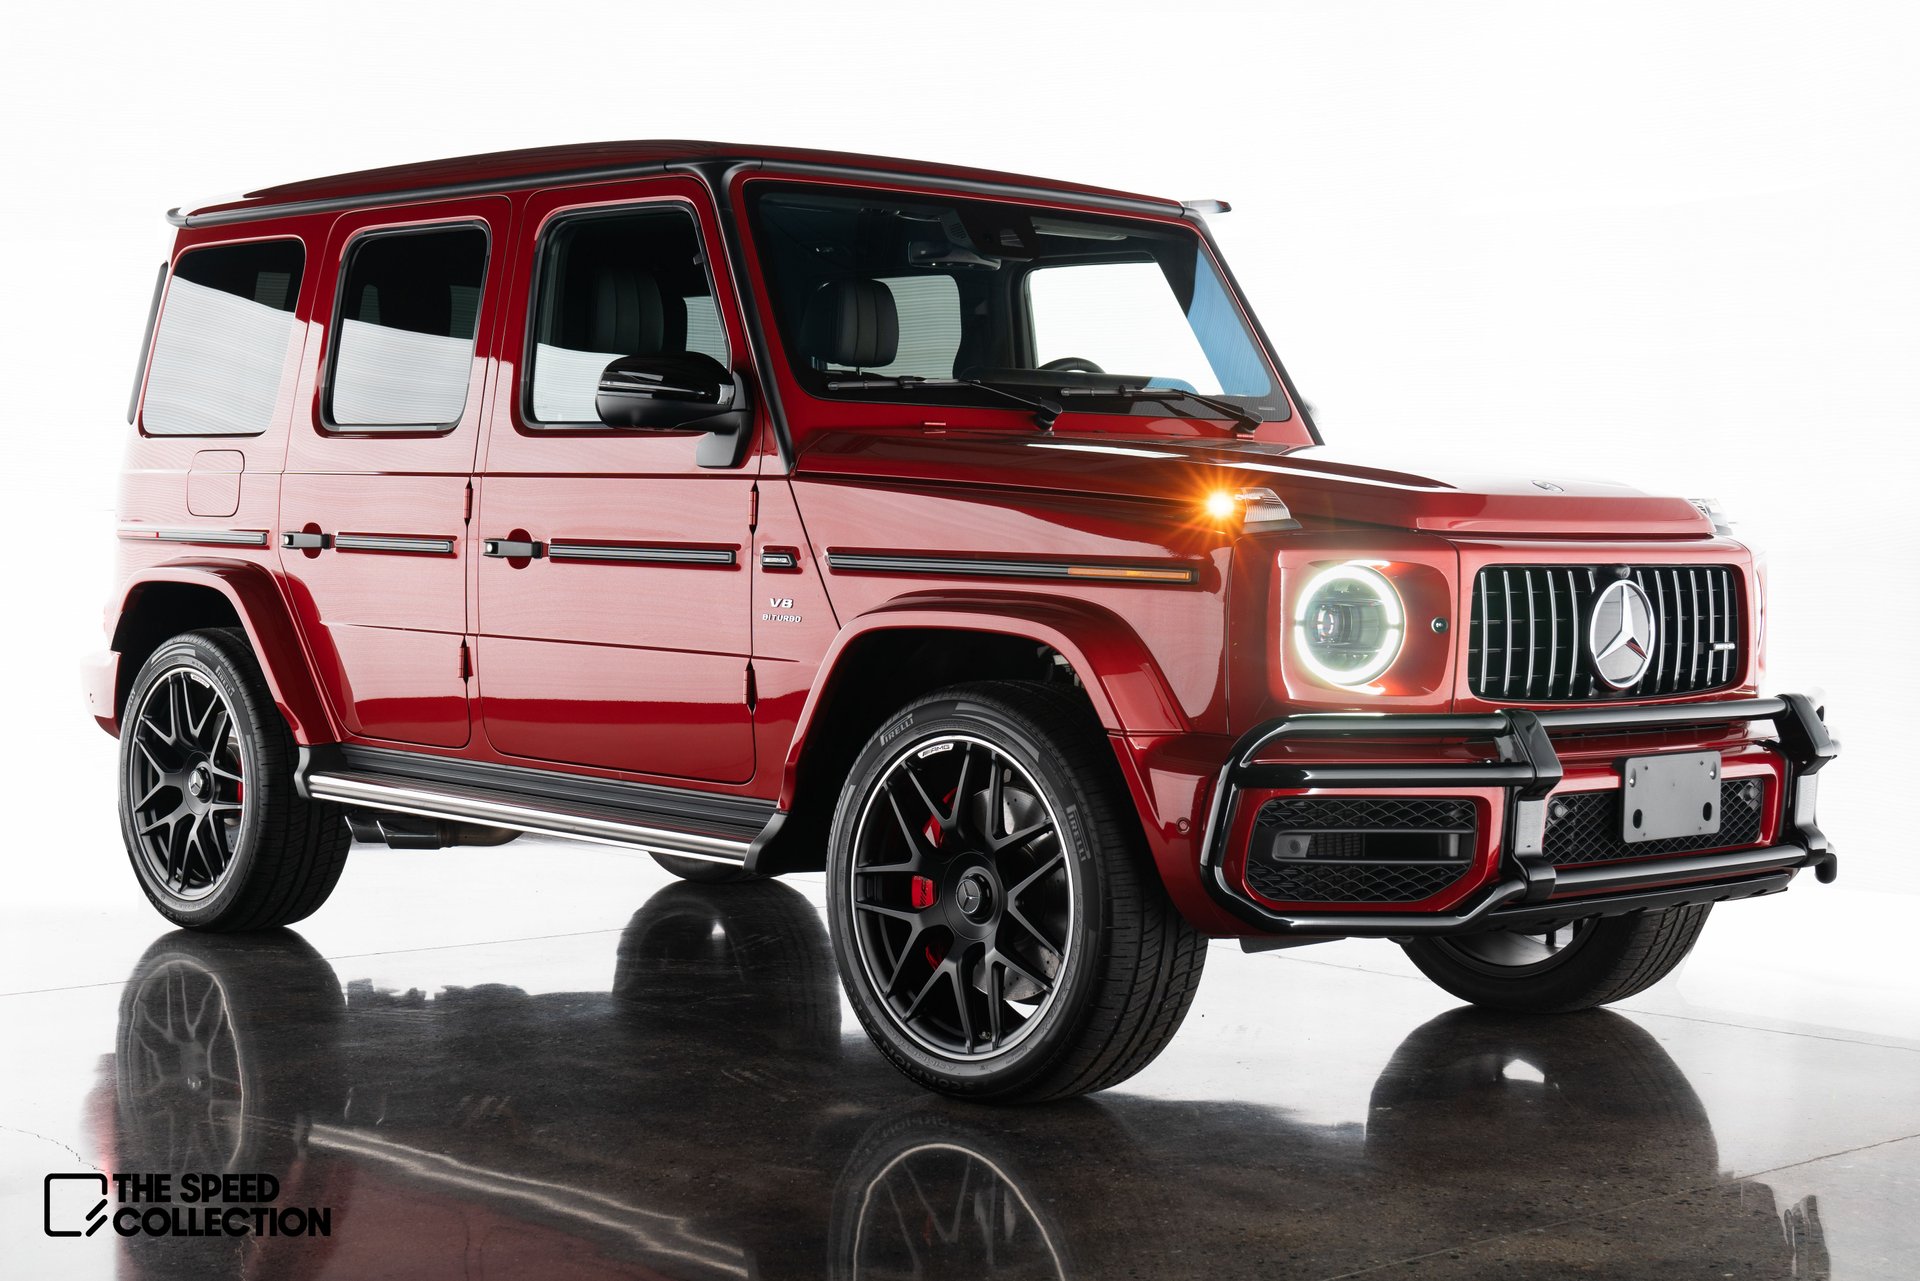 2020 Mercedes-Benz G-Class | The Speed Collection